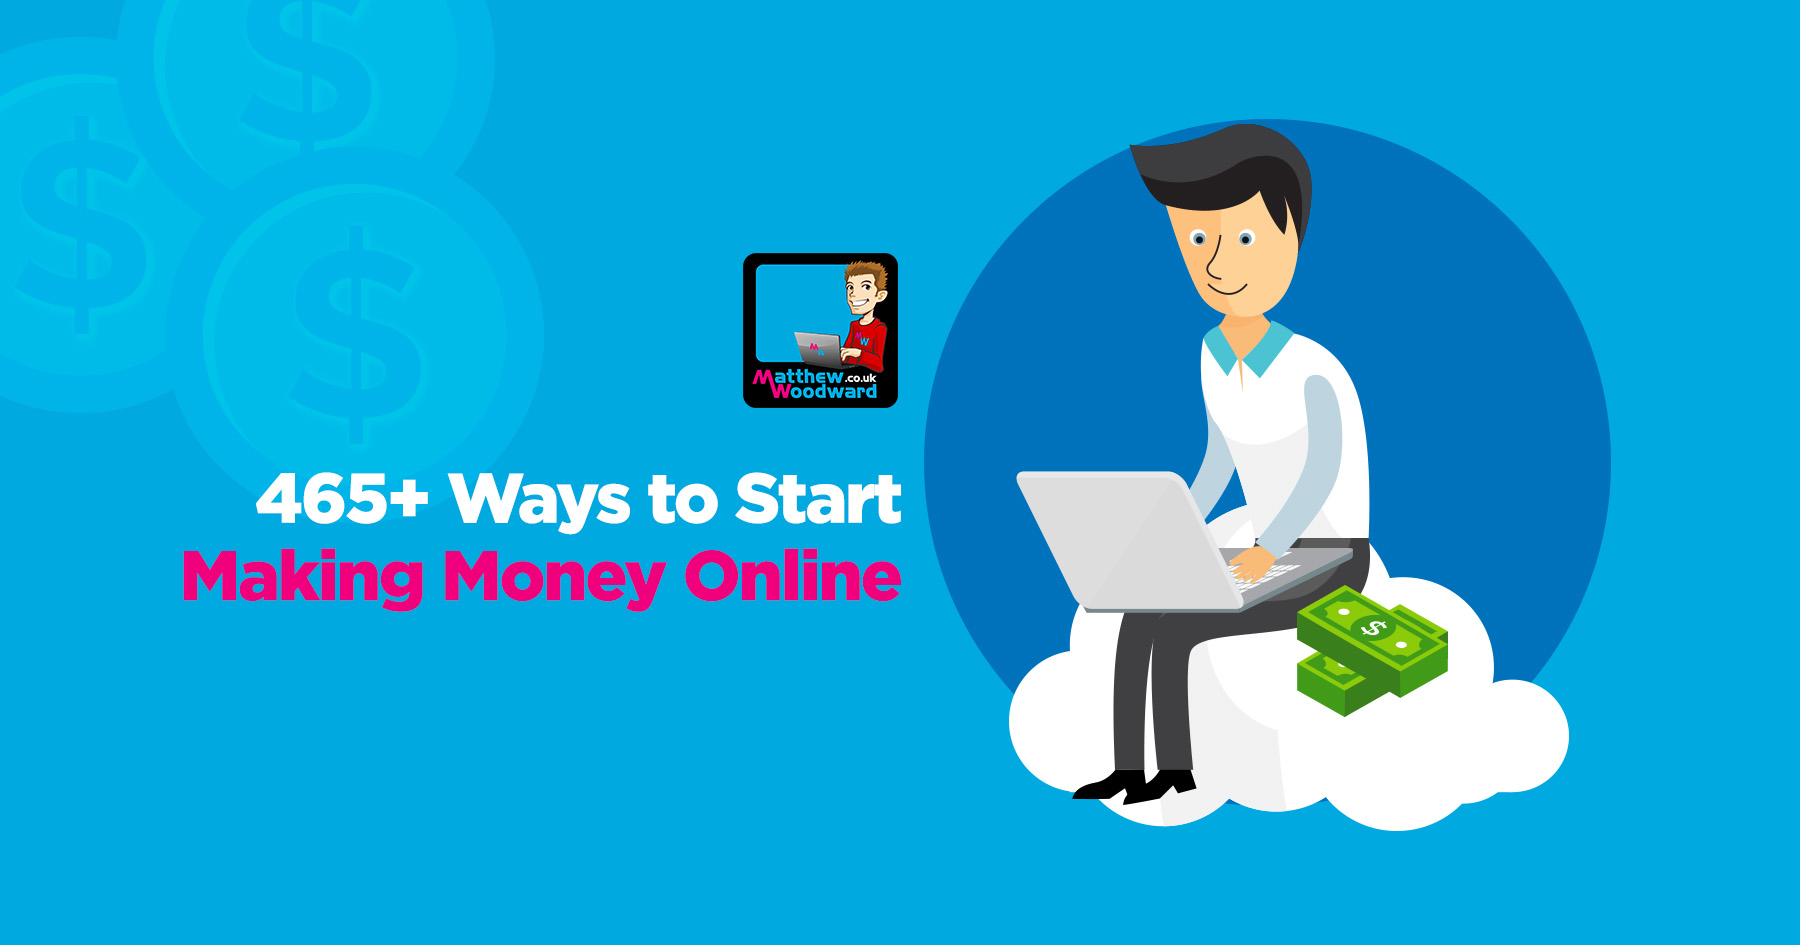 Digital products to make money blogging in